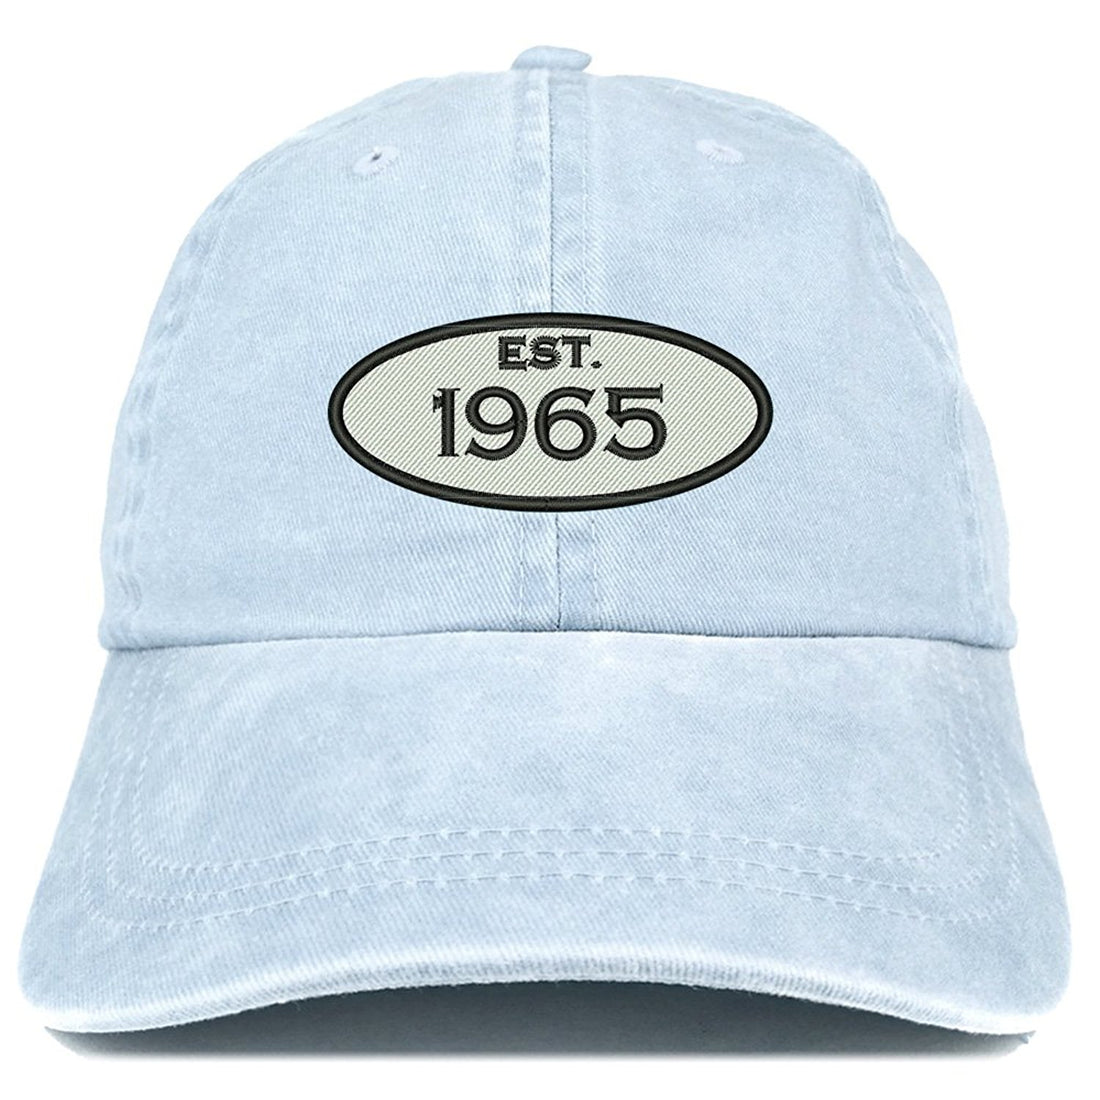 Trendy Apparel Shop Established 1965 Embroidered 54th Birthday Gift Pigment Dyed Washed Cotton Cap